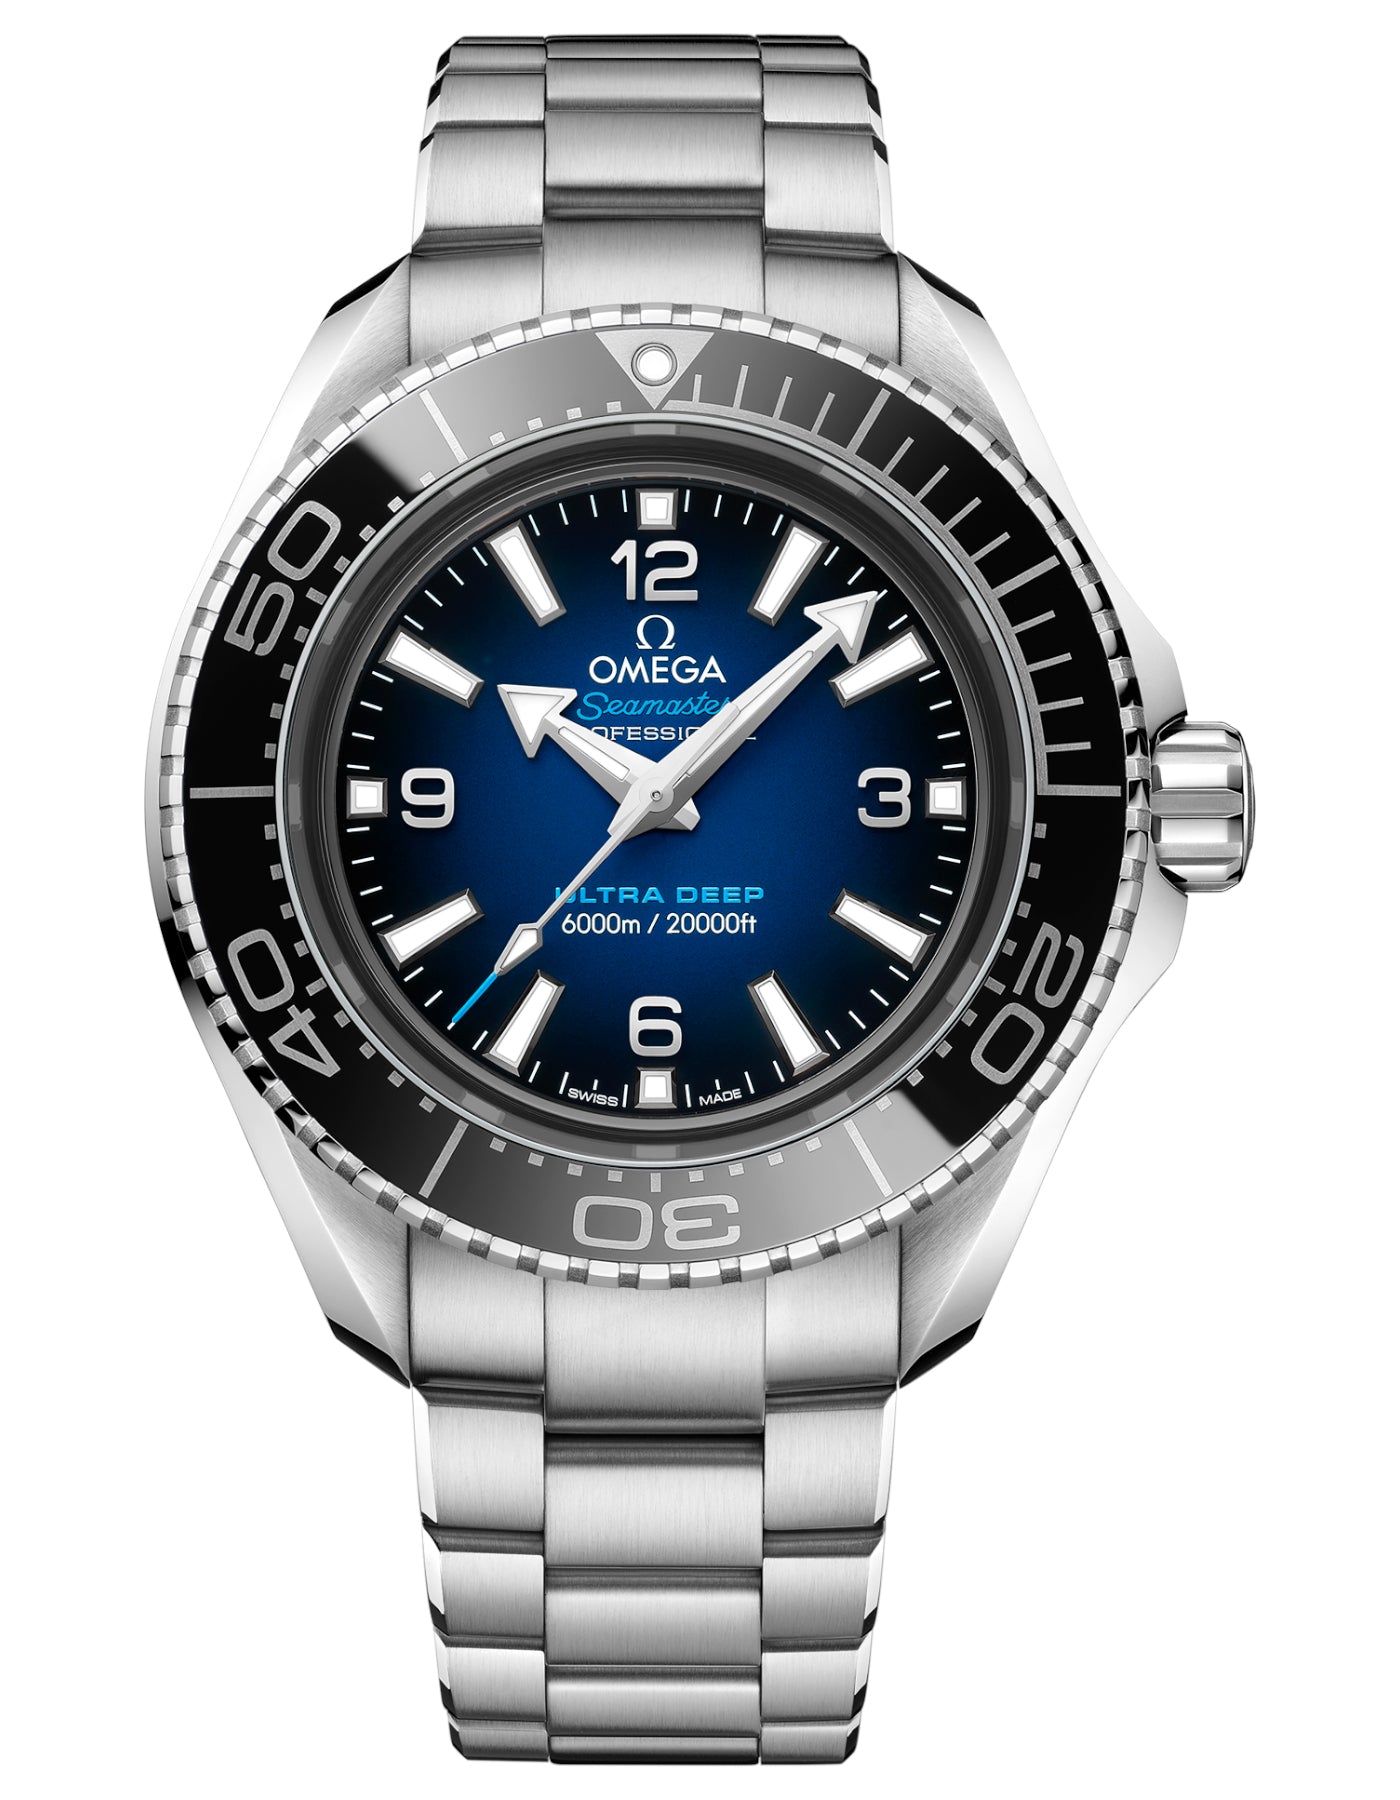 SEAMASTER PLANET OCEAN 6000M CO‑AXIAL MASTER CHRONOMETER 45.5 MM "Ultra Deep"